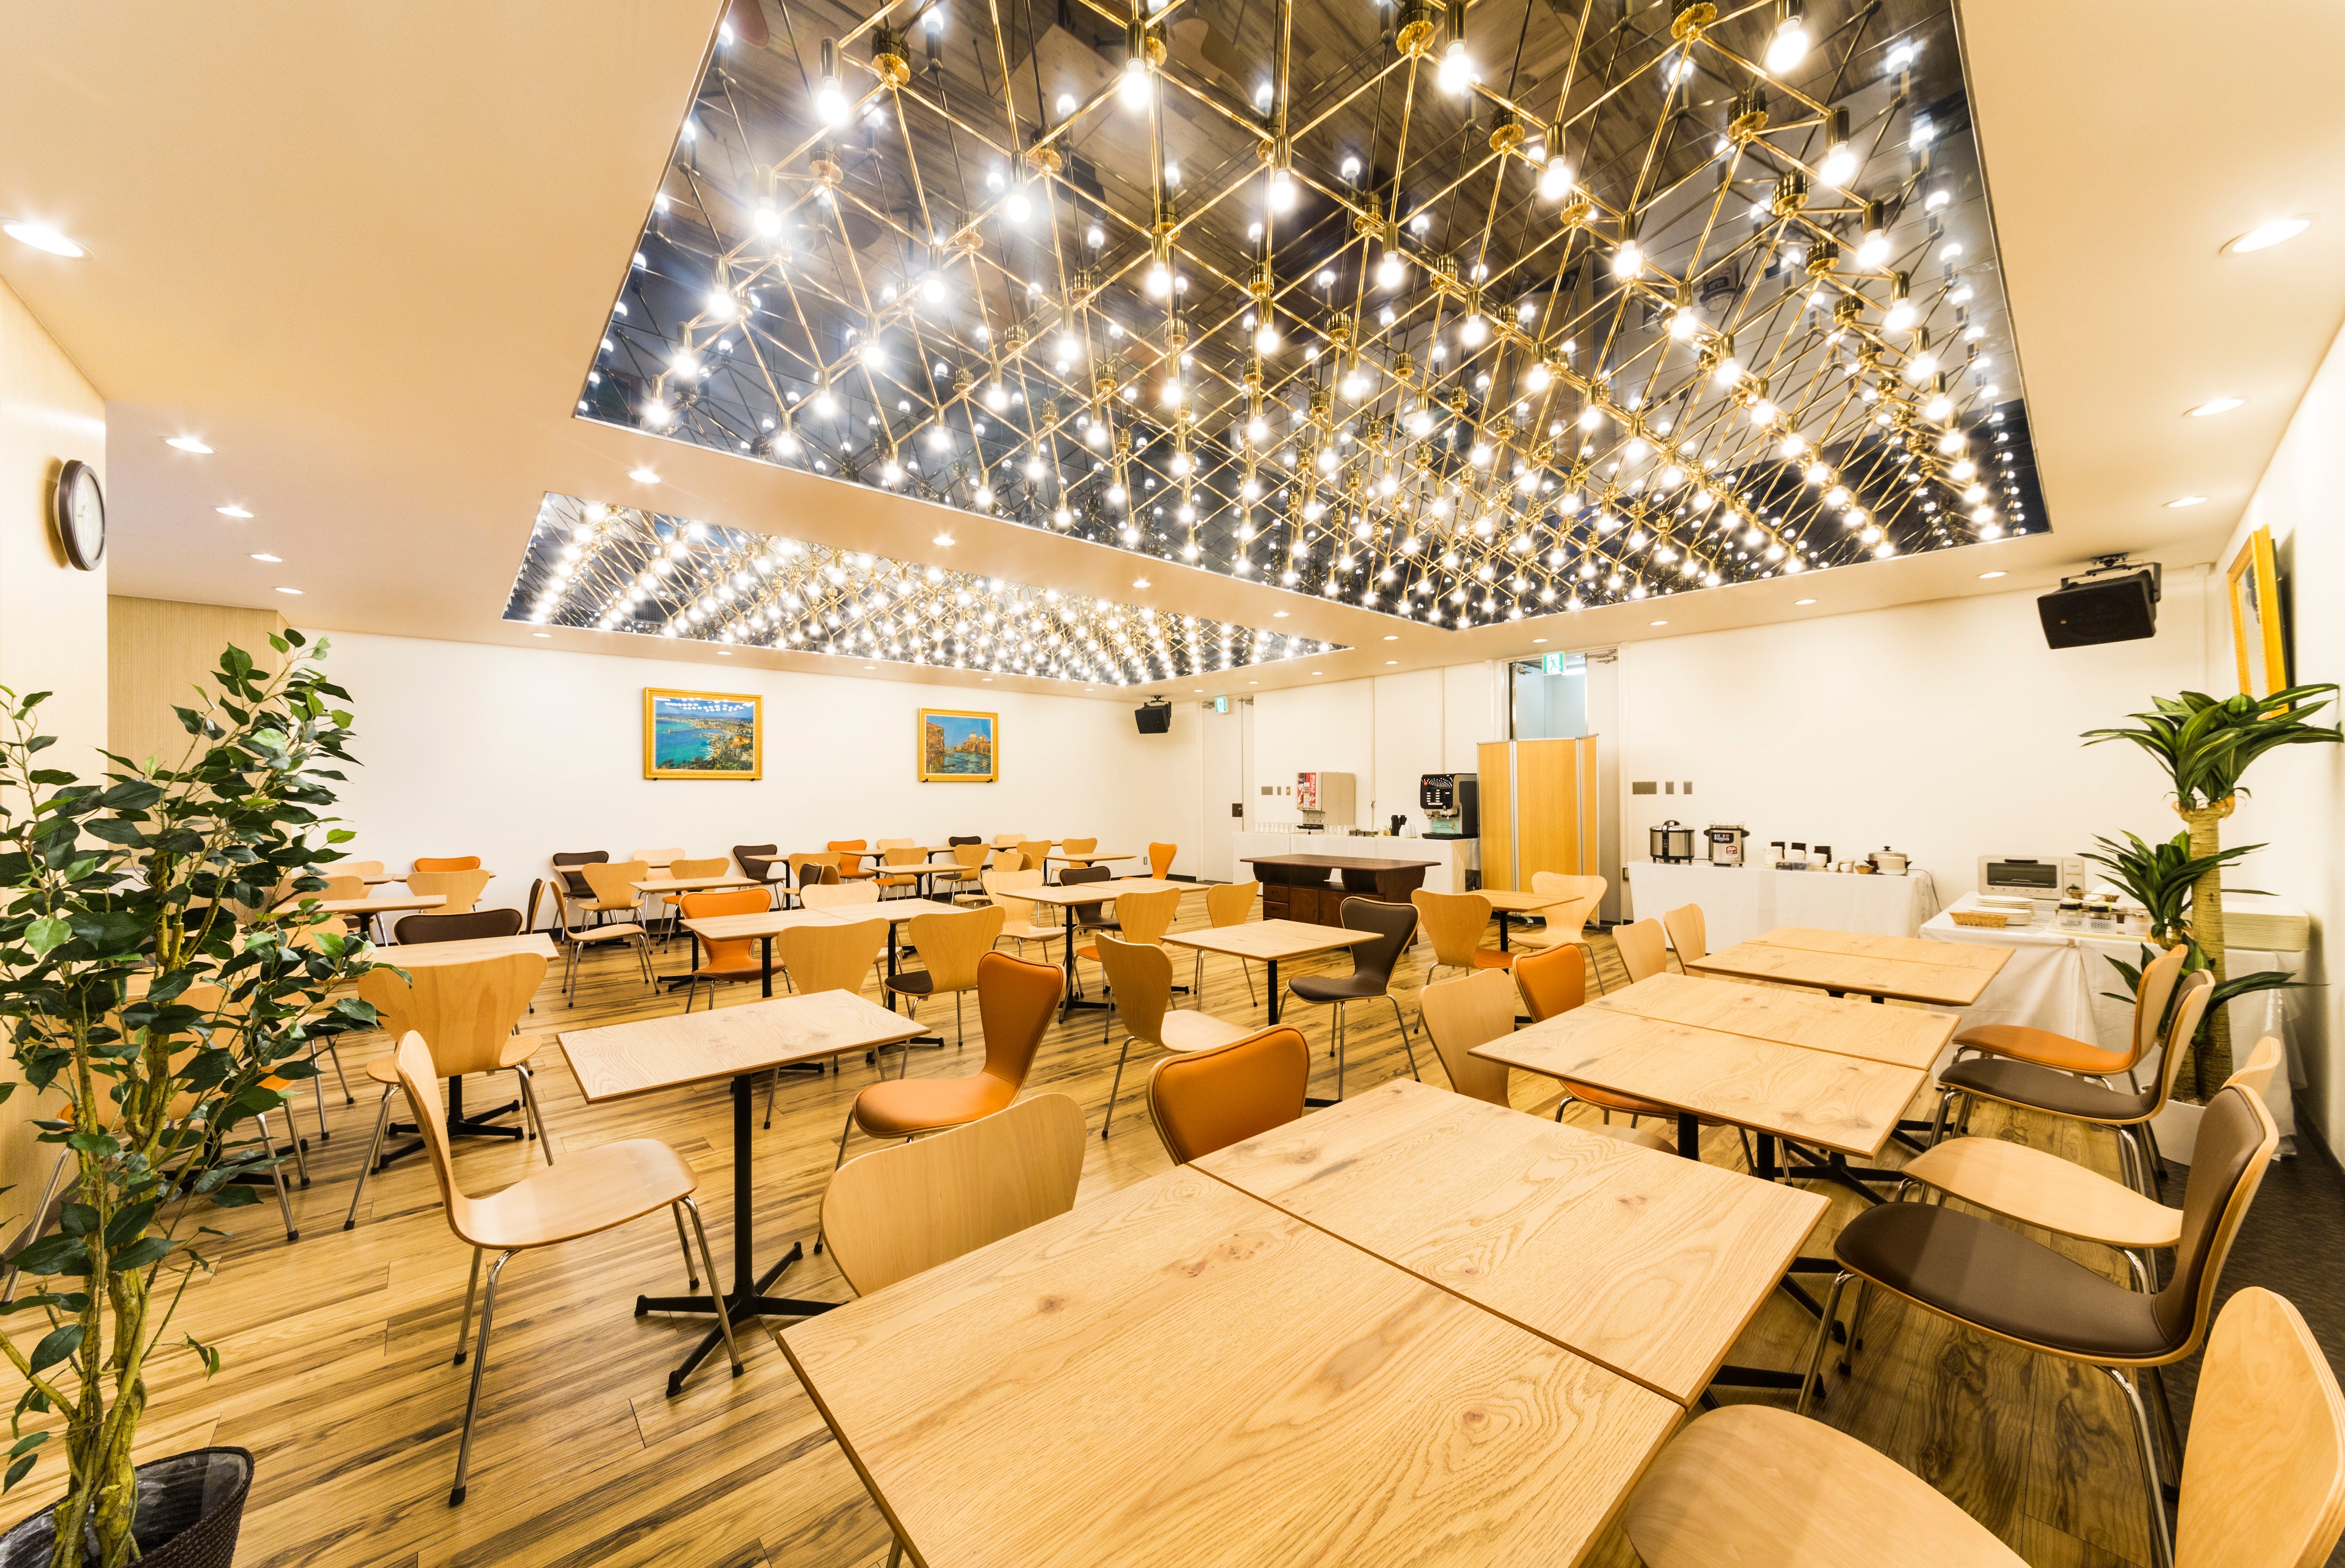 Breakfast venue First warm breakfast You can enjoy it in a bright and spacious restaurant.